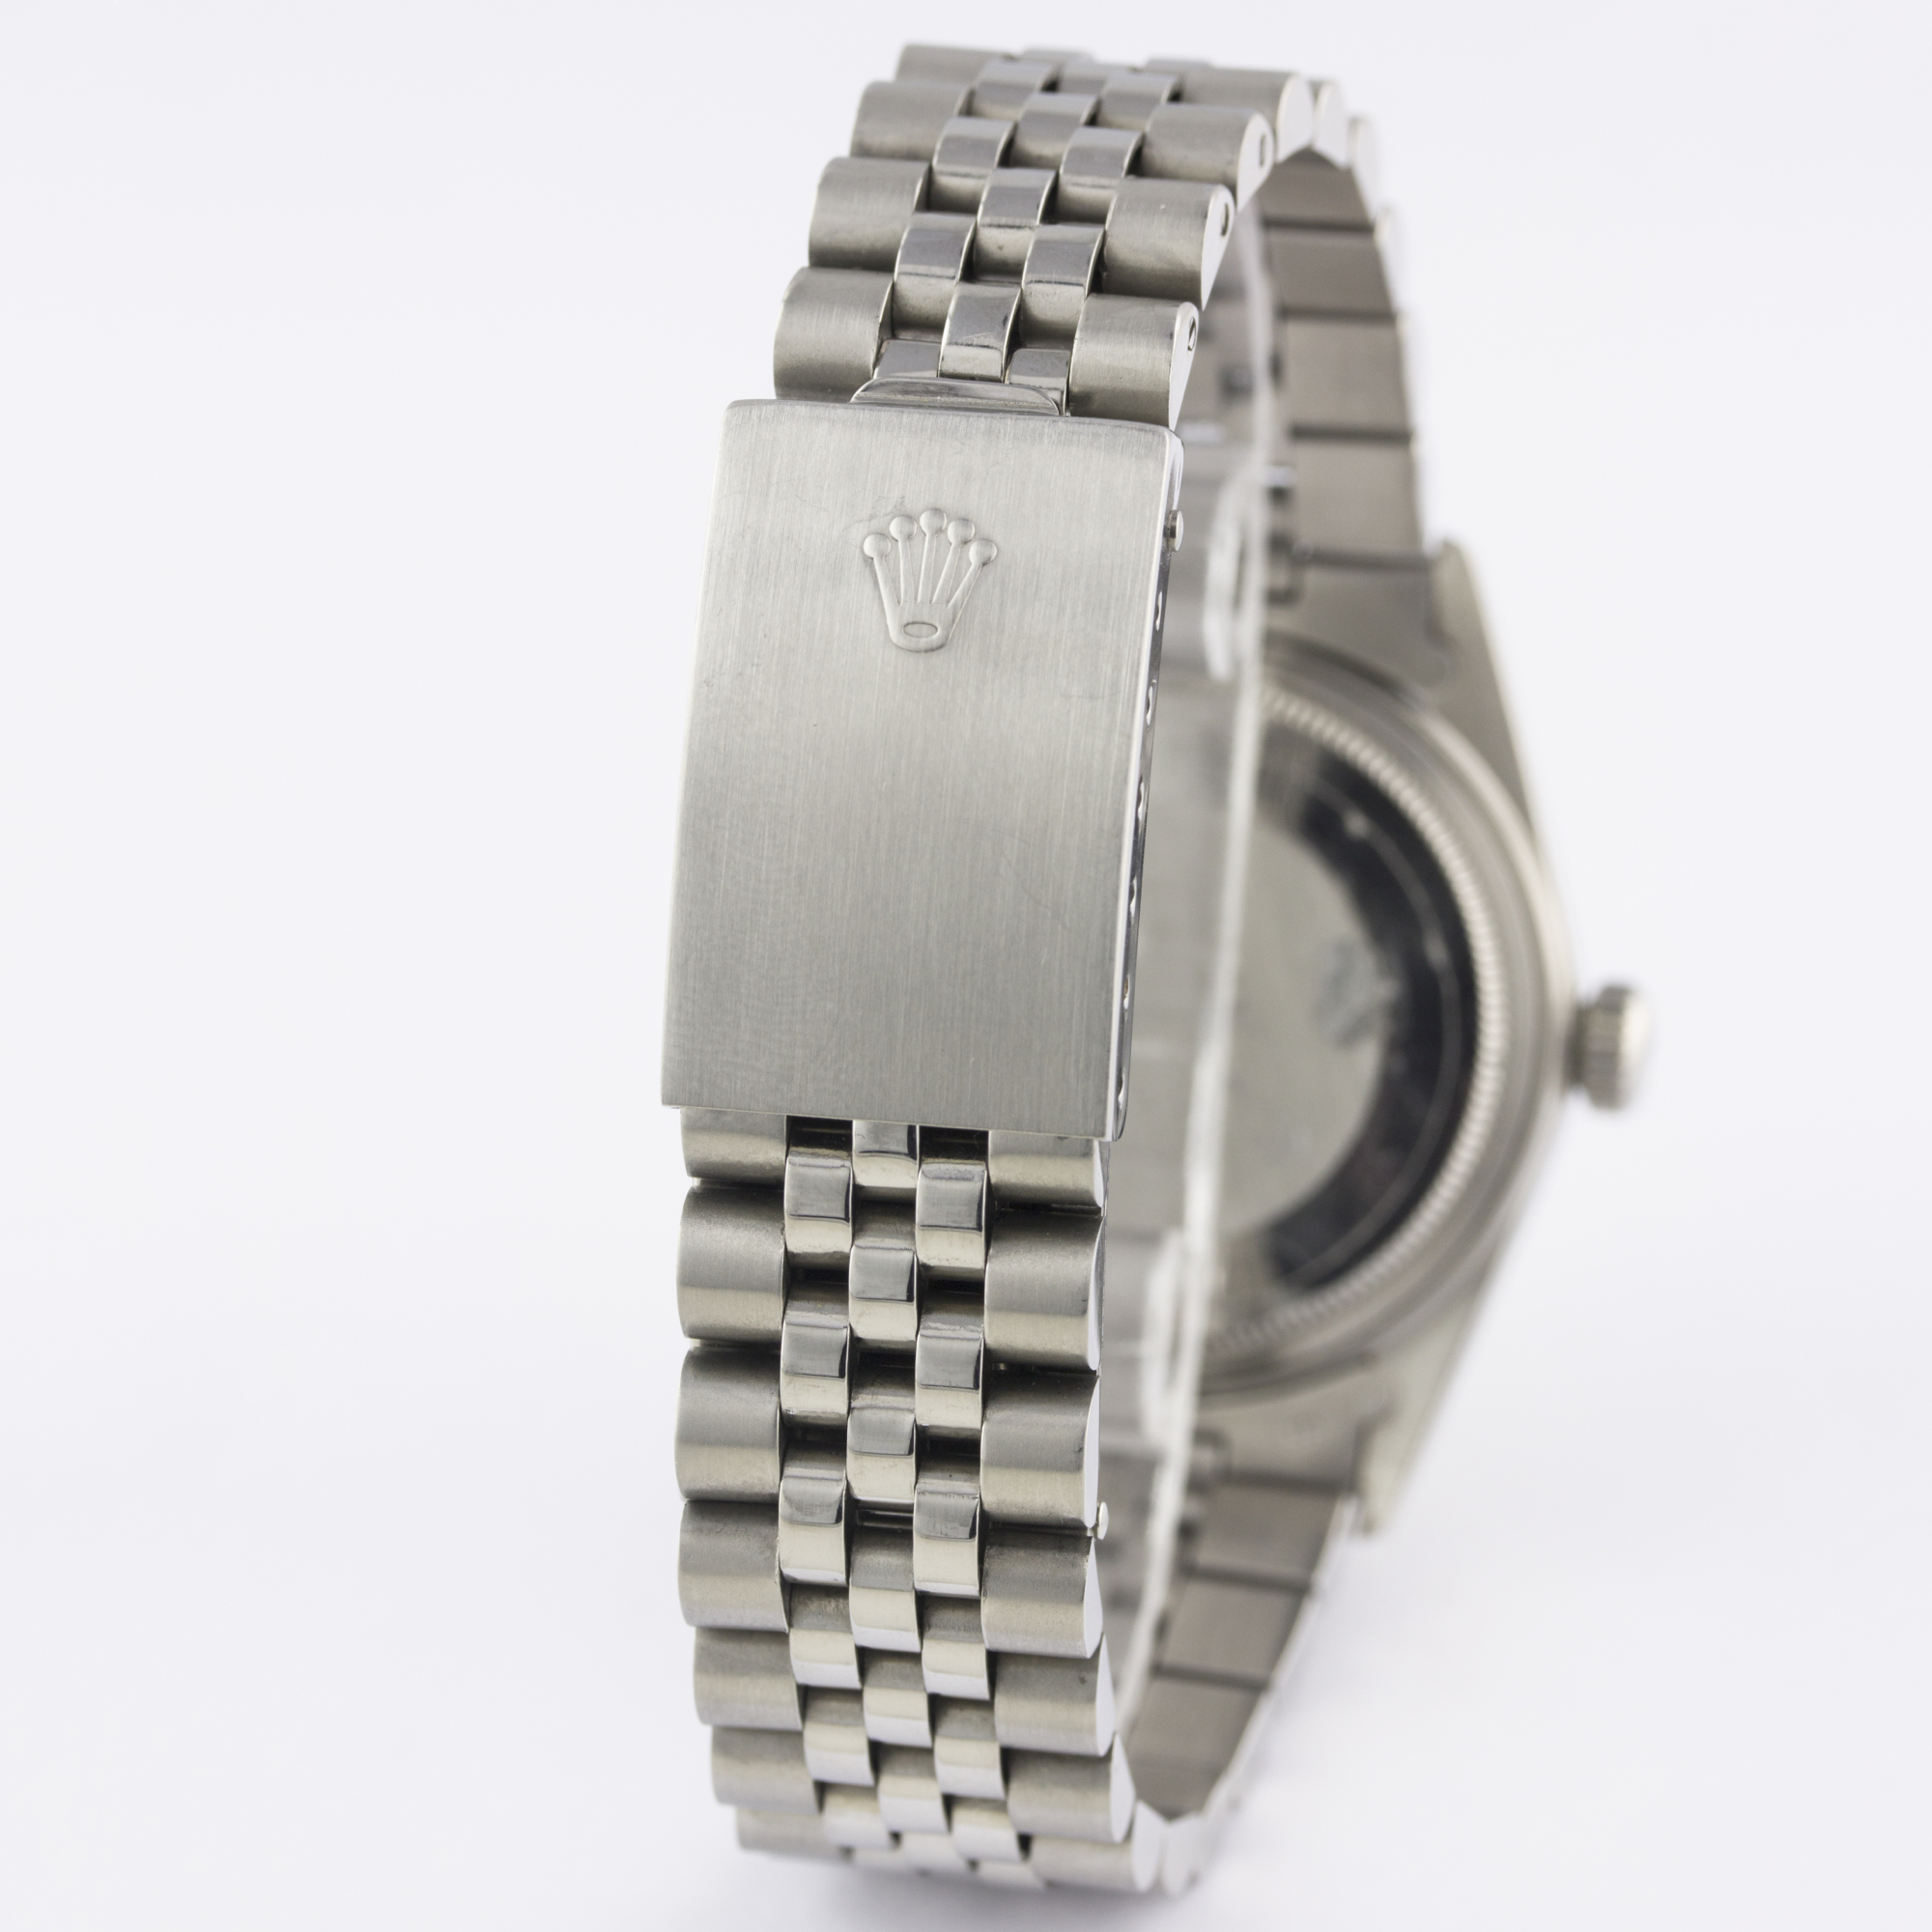 A GENTLEMAN'S STEEL & WHITE GOLD ROLEX OYSTER PERPETUAL DATEJUST BRACELET WATCH CIRCA 1977, REF. - Image 6 of 9